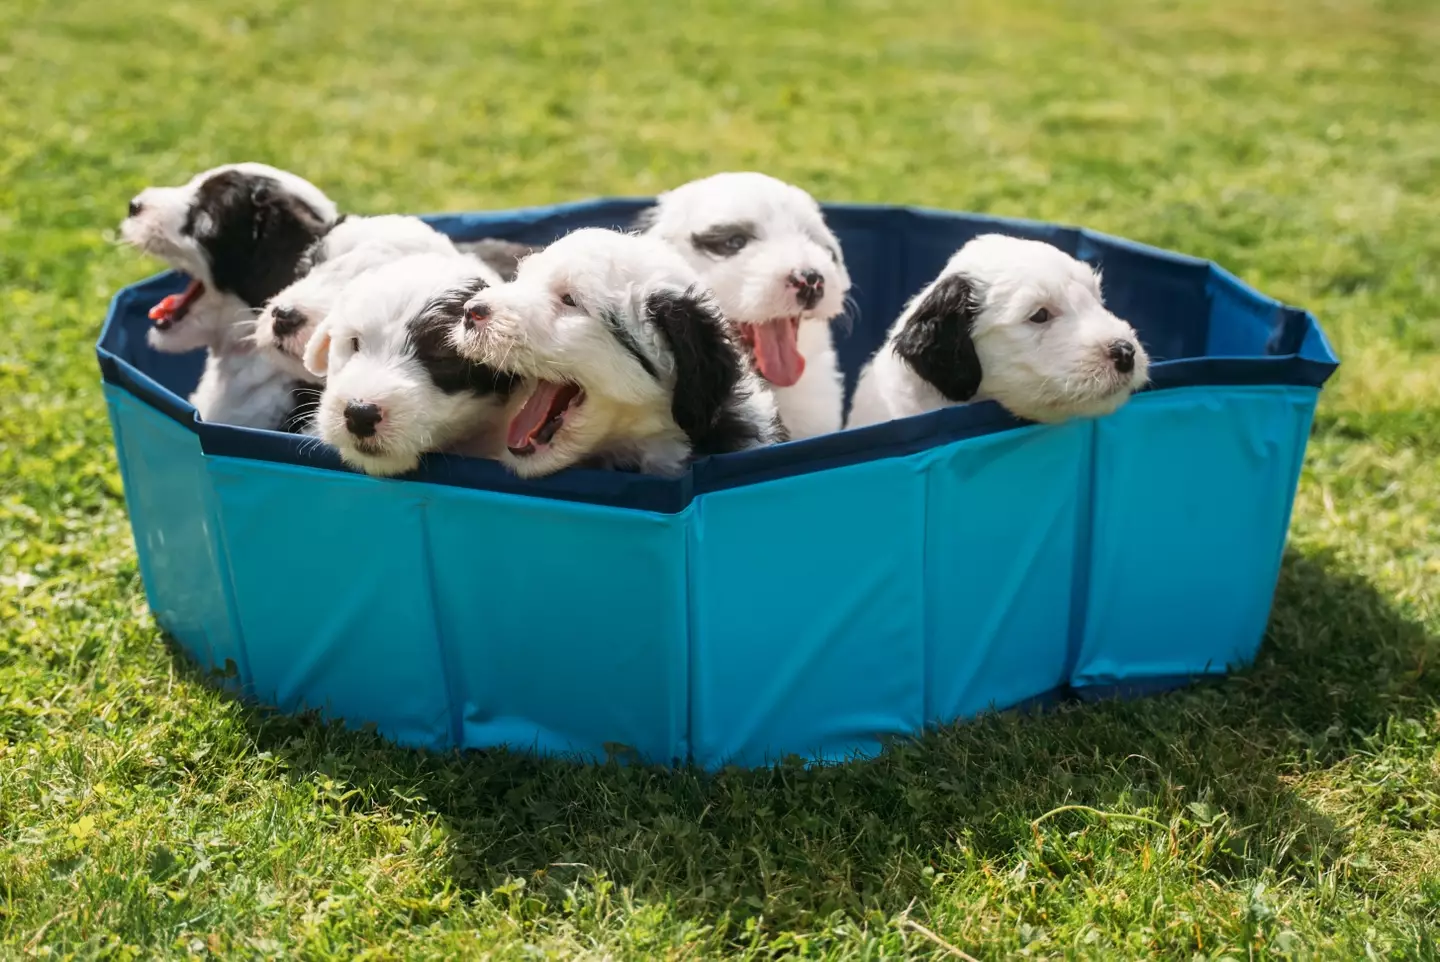 The puppies could be the future faces of Dulux.